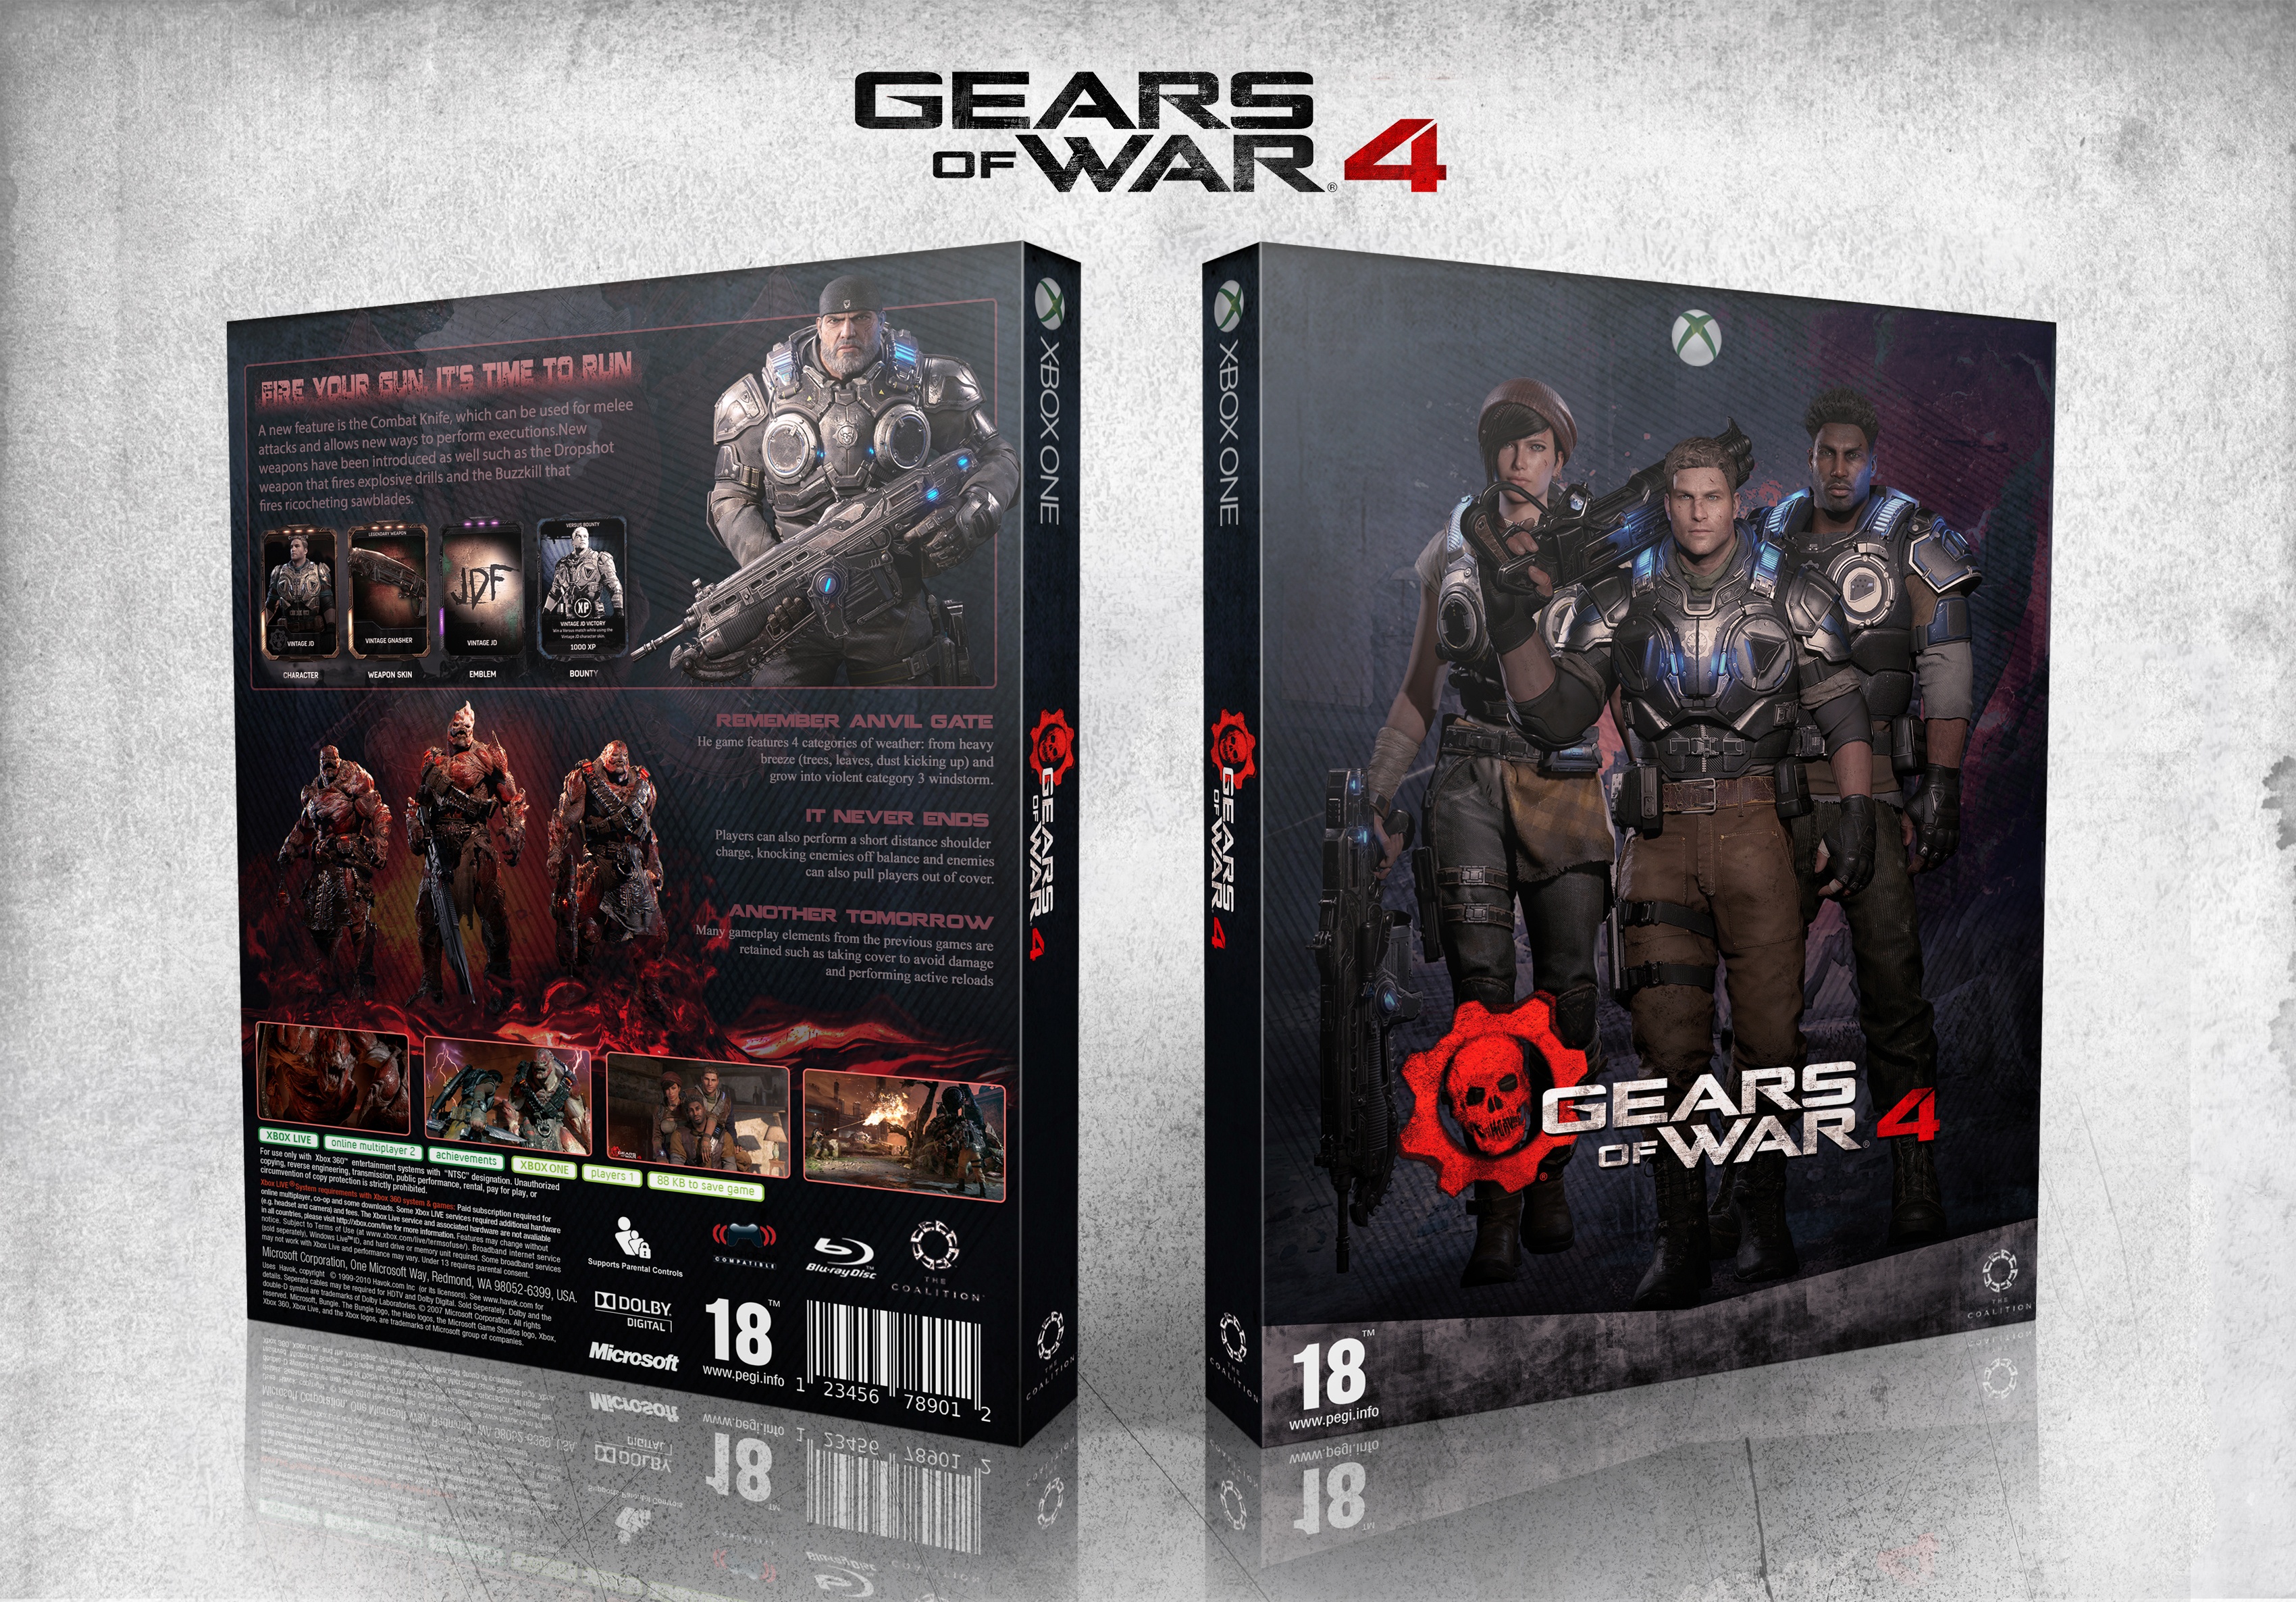 Gears of War 4 box cover